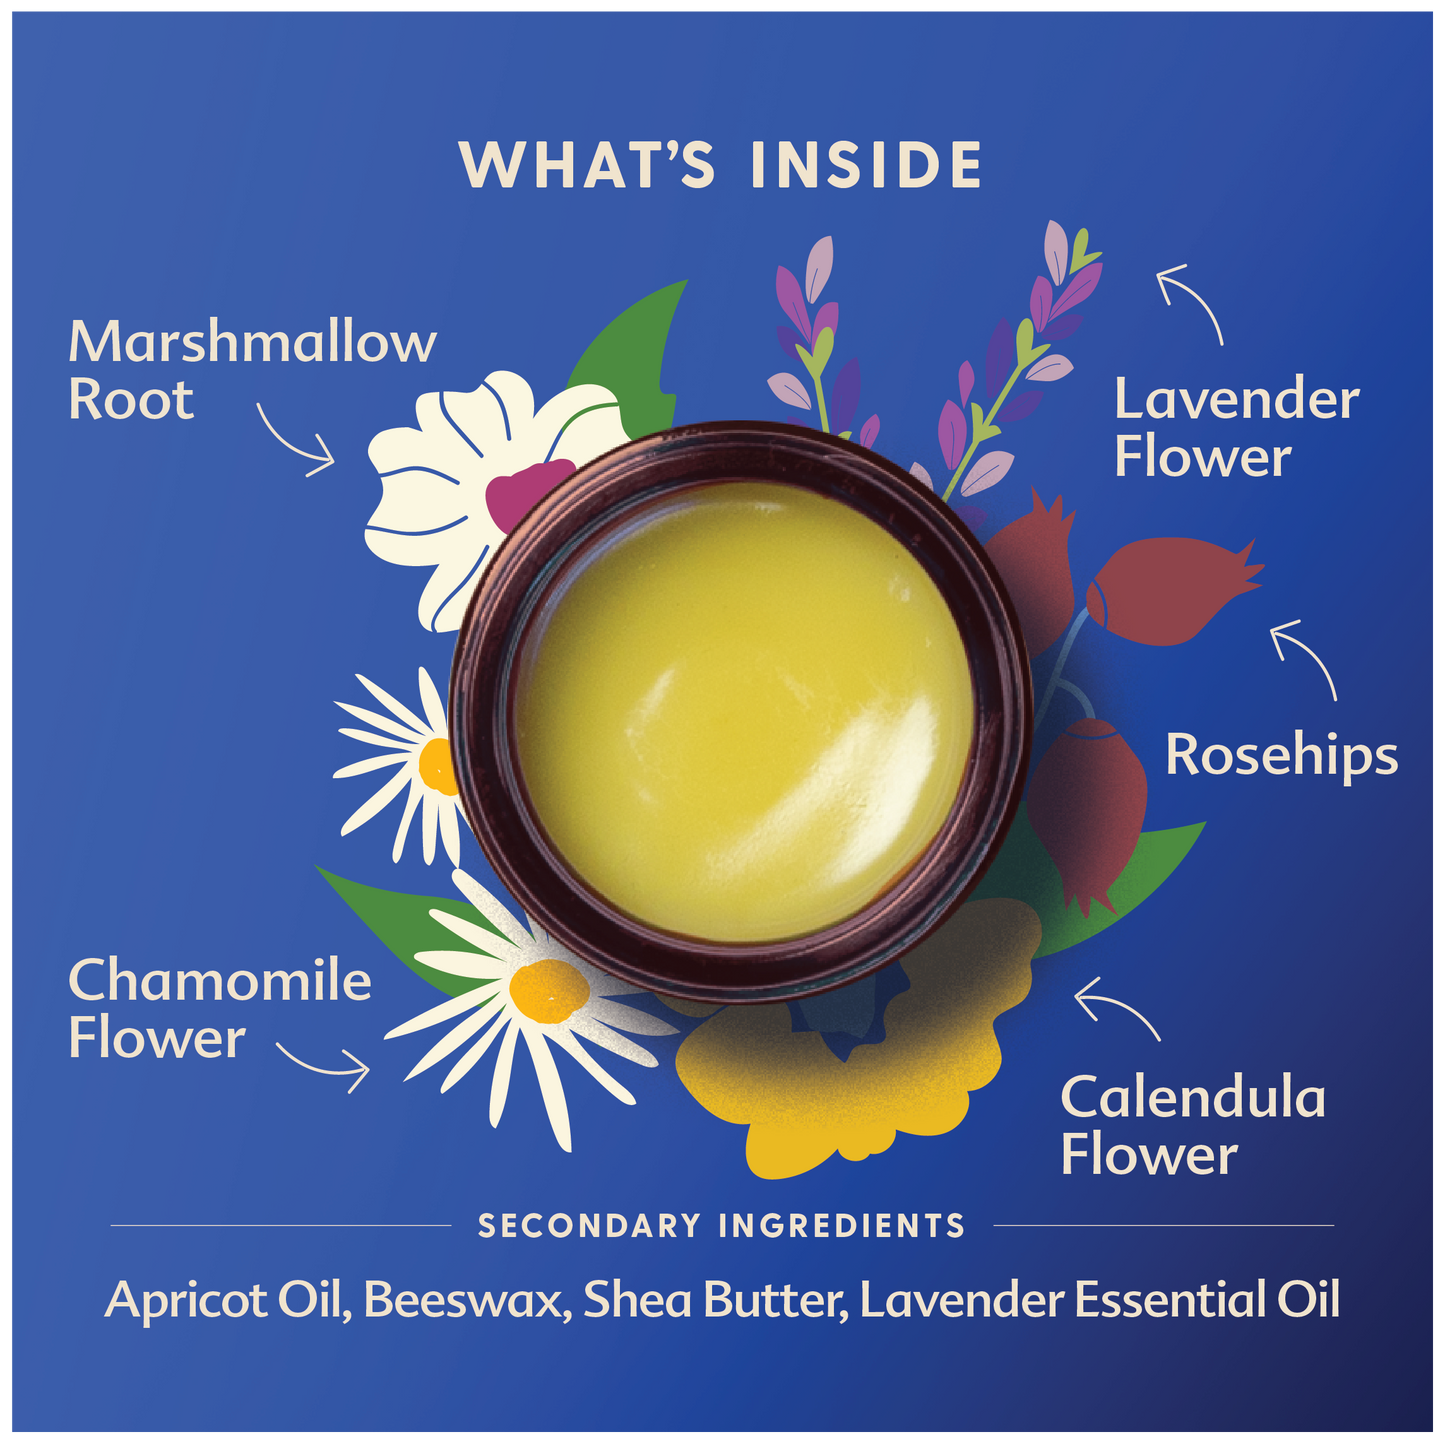 image of whats inside of the jar which is marshmallow root, lavender flower, rosehips, calendula flower, chamomile flower and secondary ingredients such as apricot oil, beeswax, shea butter, lavender essential oil